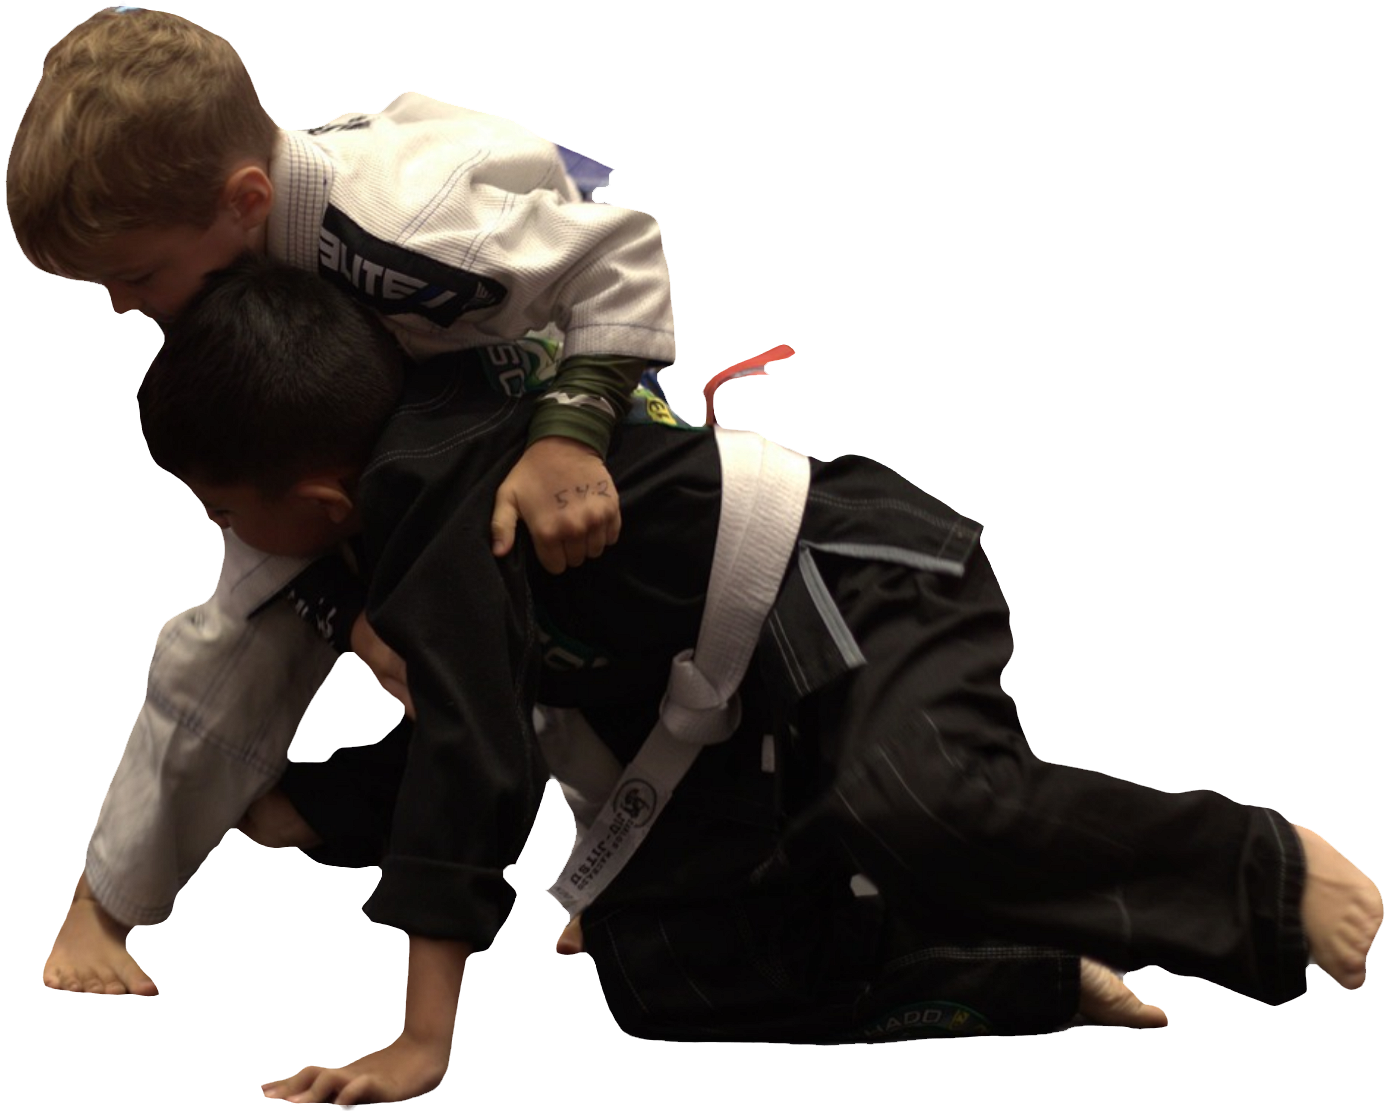 Two young boys are practicing martial arts and one of them has the letter a on his belt